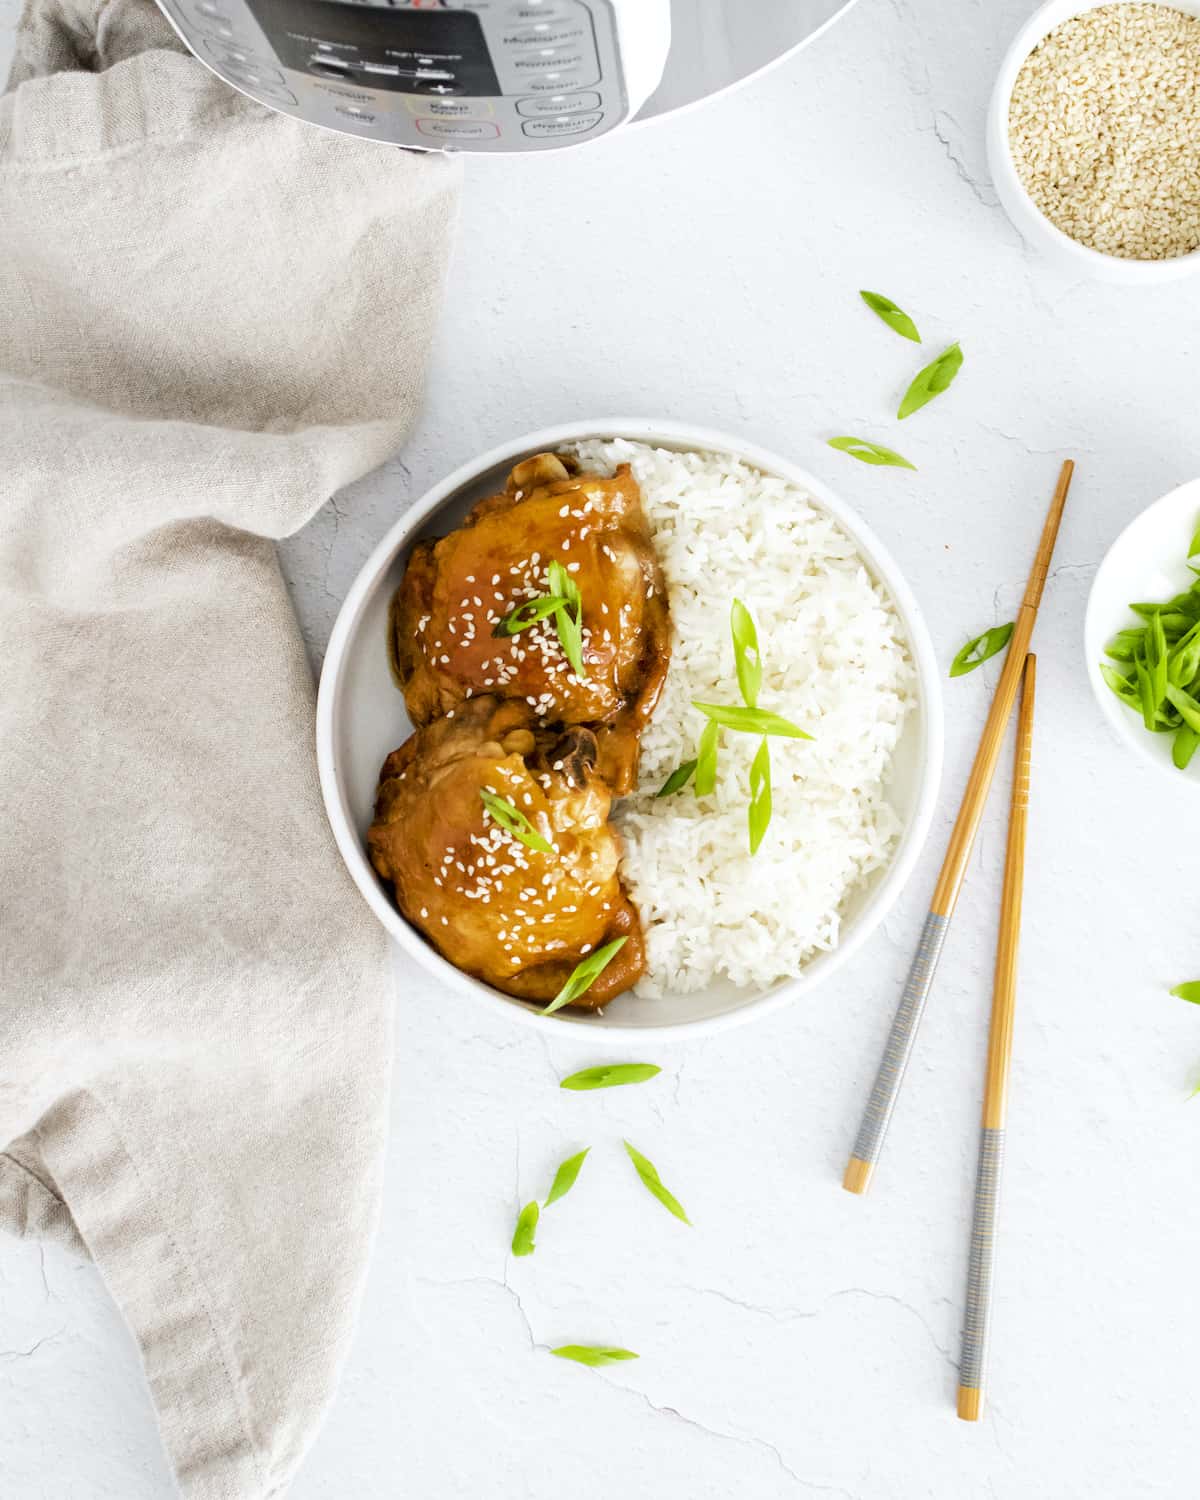 the completed instant pot honey garlic chicken served in a bowl with rice